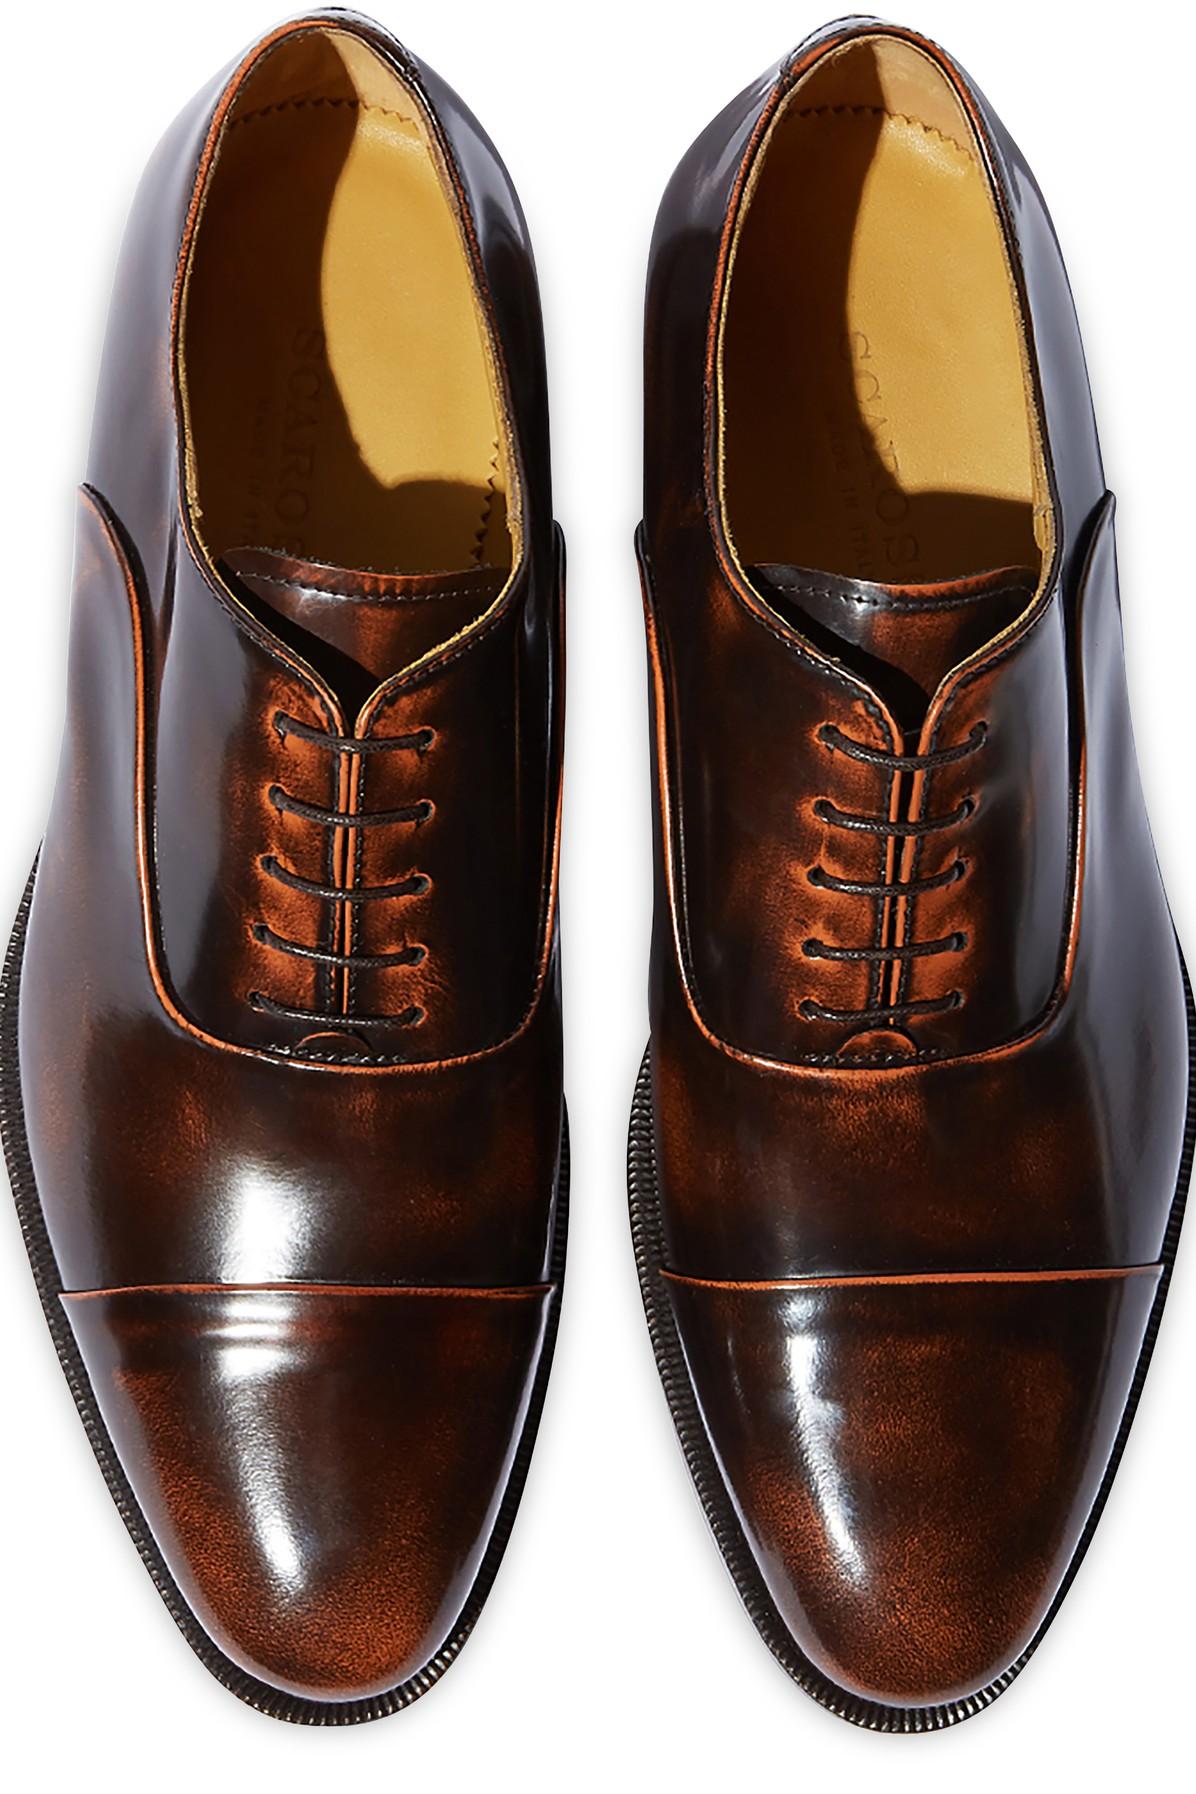 SCAROSSO Leather Lorenzo Derbies in Brown_calf (Brown) for Men - Save 12% |  Lyst